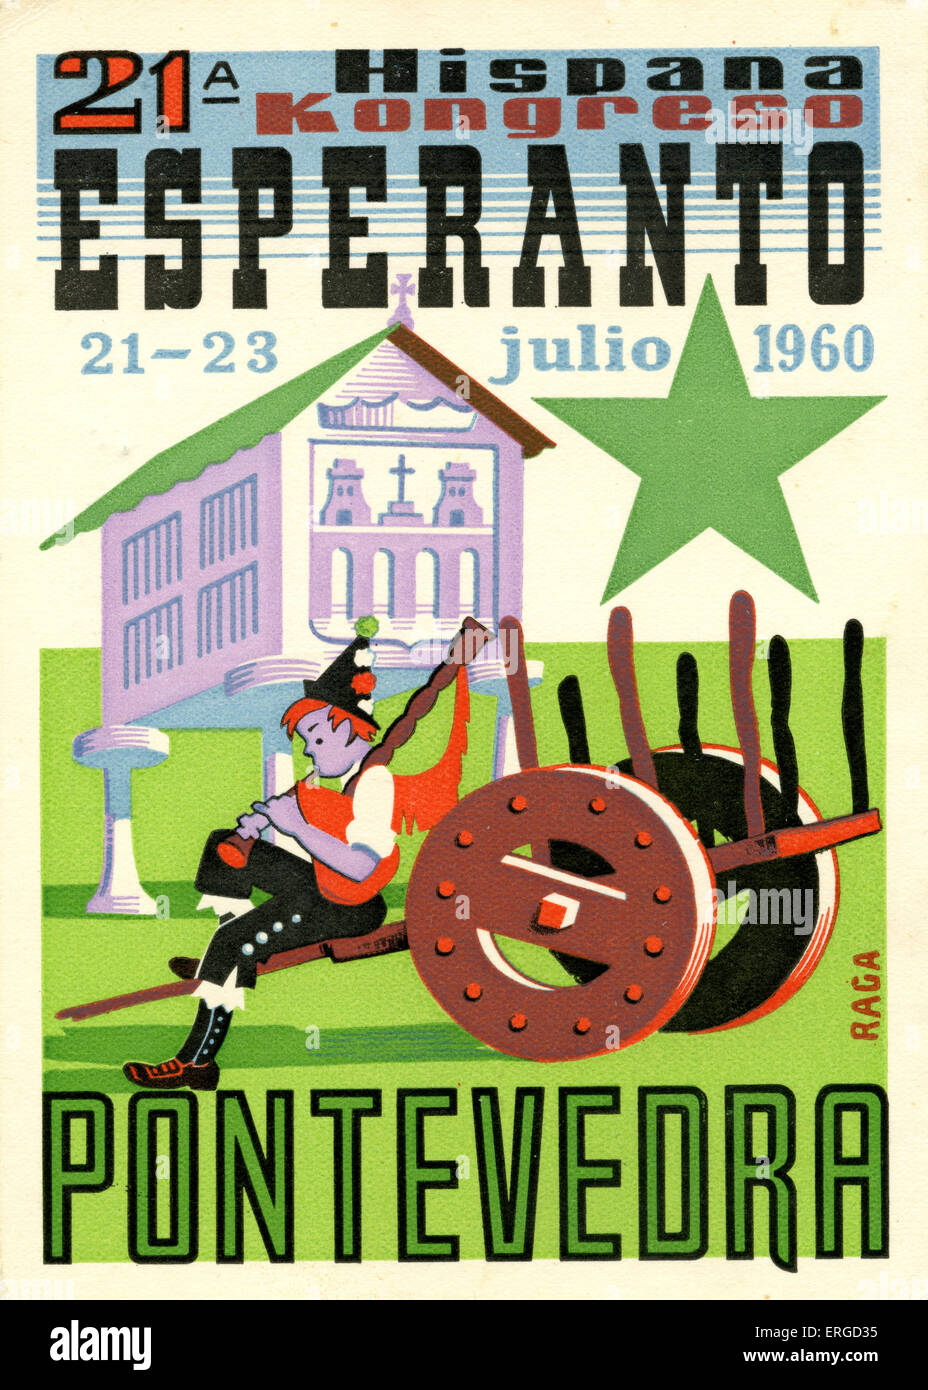 Advert for the 21st Spanish Esperanto Congress. 21- 23 July 1960 at Pontevedra, Galicia, Spain. Shows a boy in traditional Stock Photo